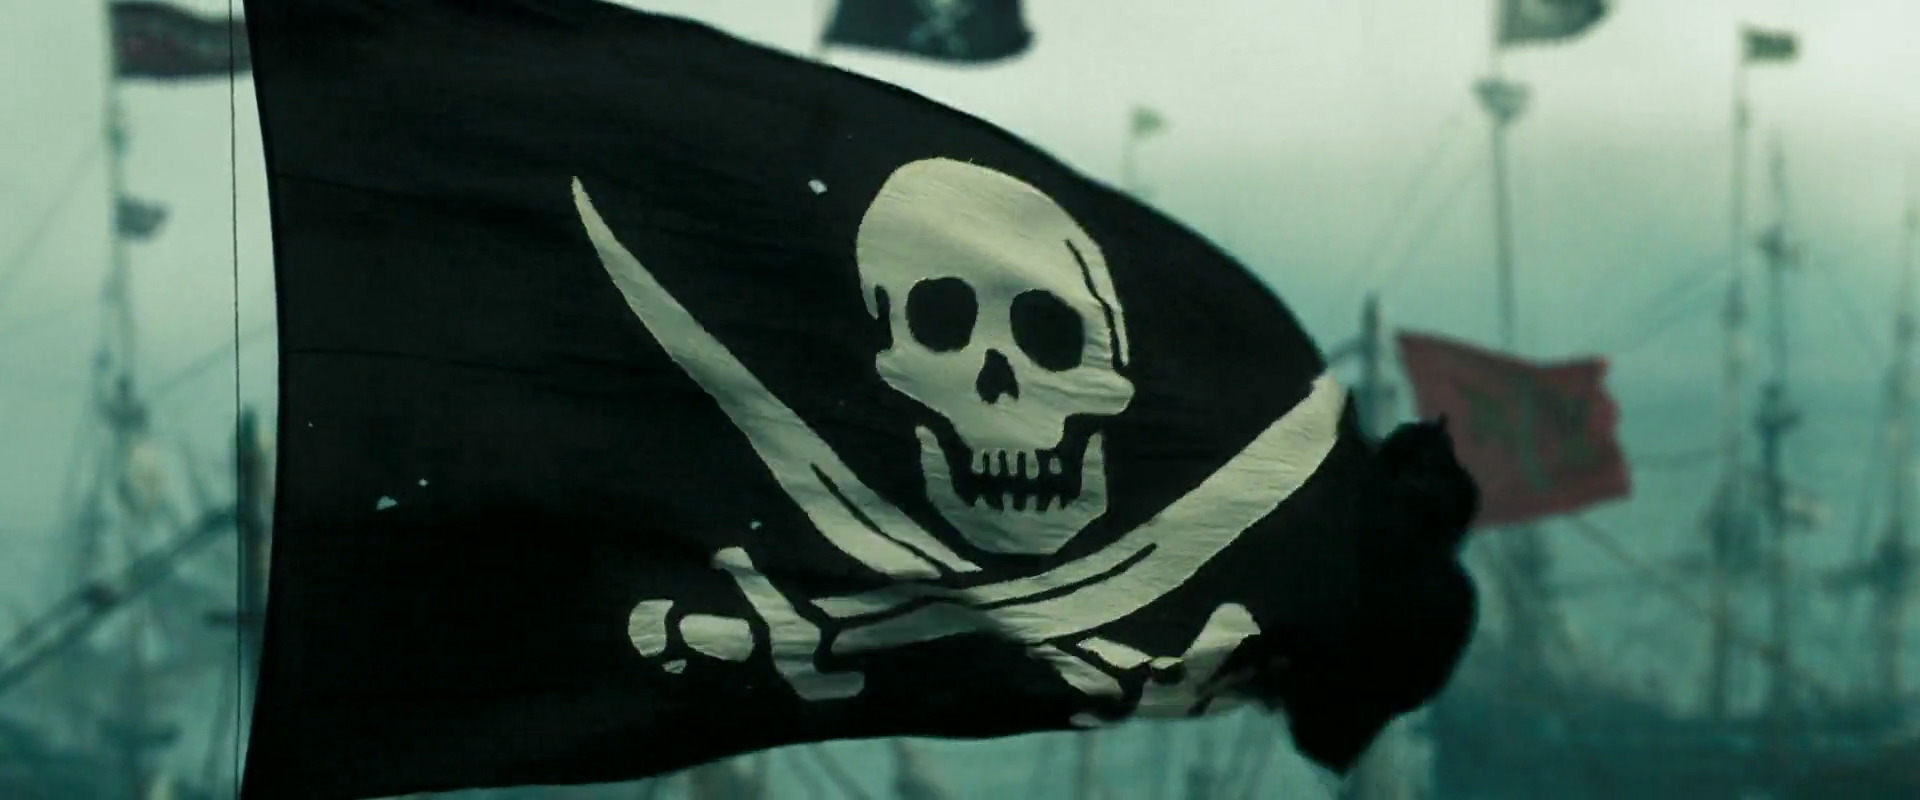 Jolly Roger (flag), Pirates of the Caribbean Wiki